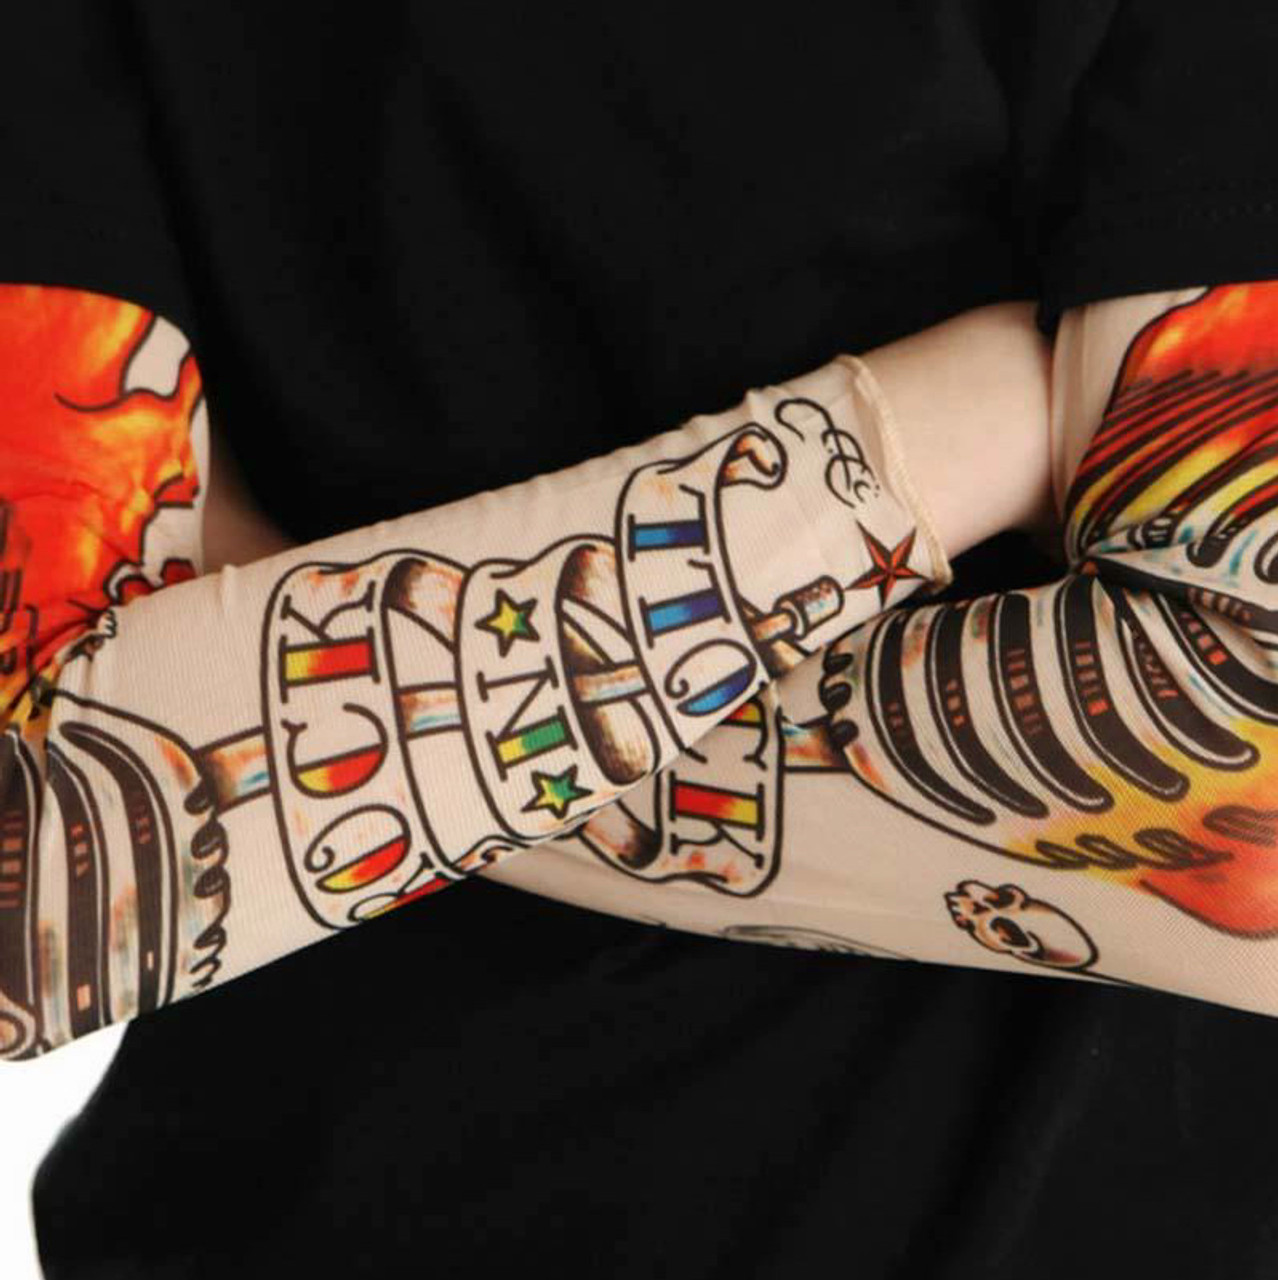 What To Wear When Getting a Back Tattoo - AuthorityTattoo